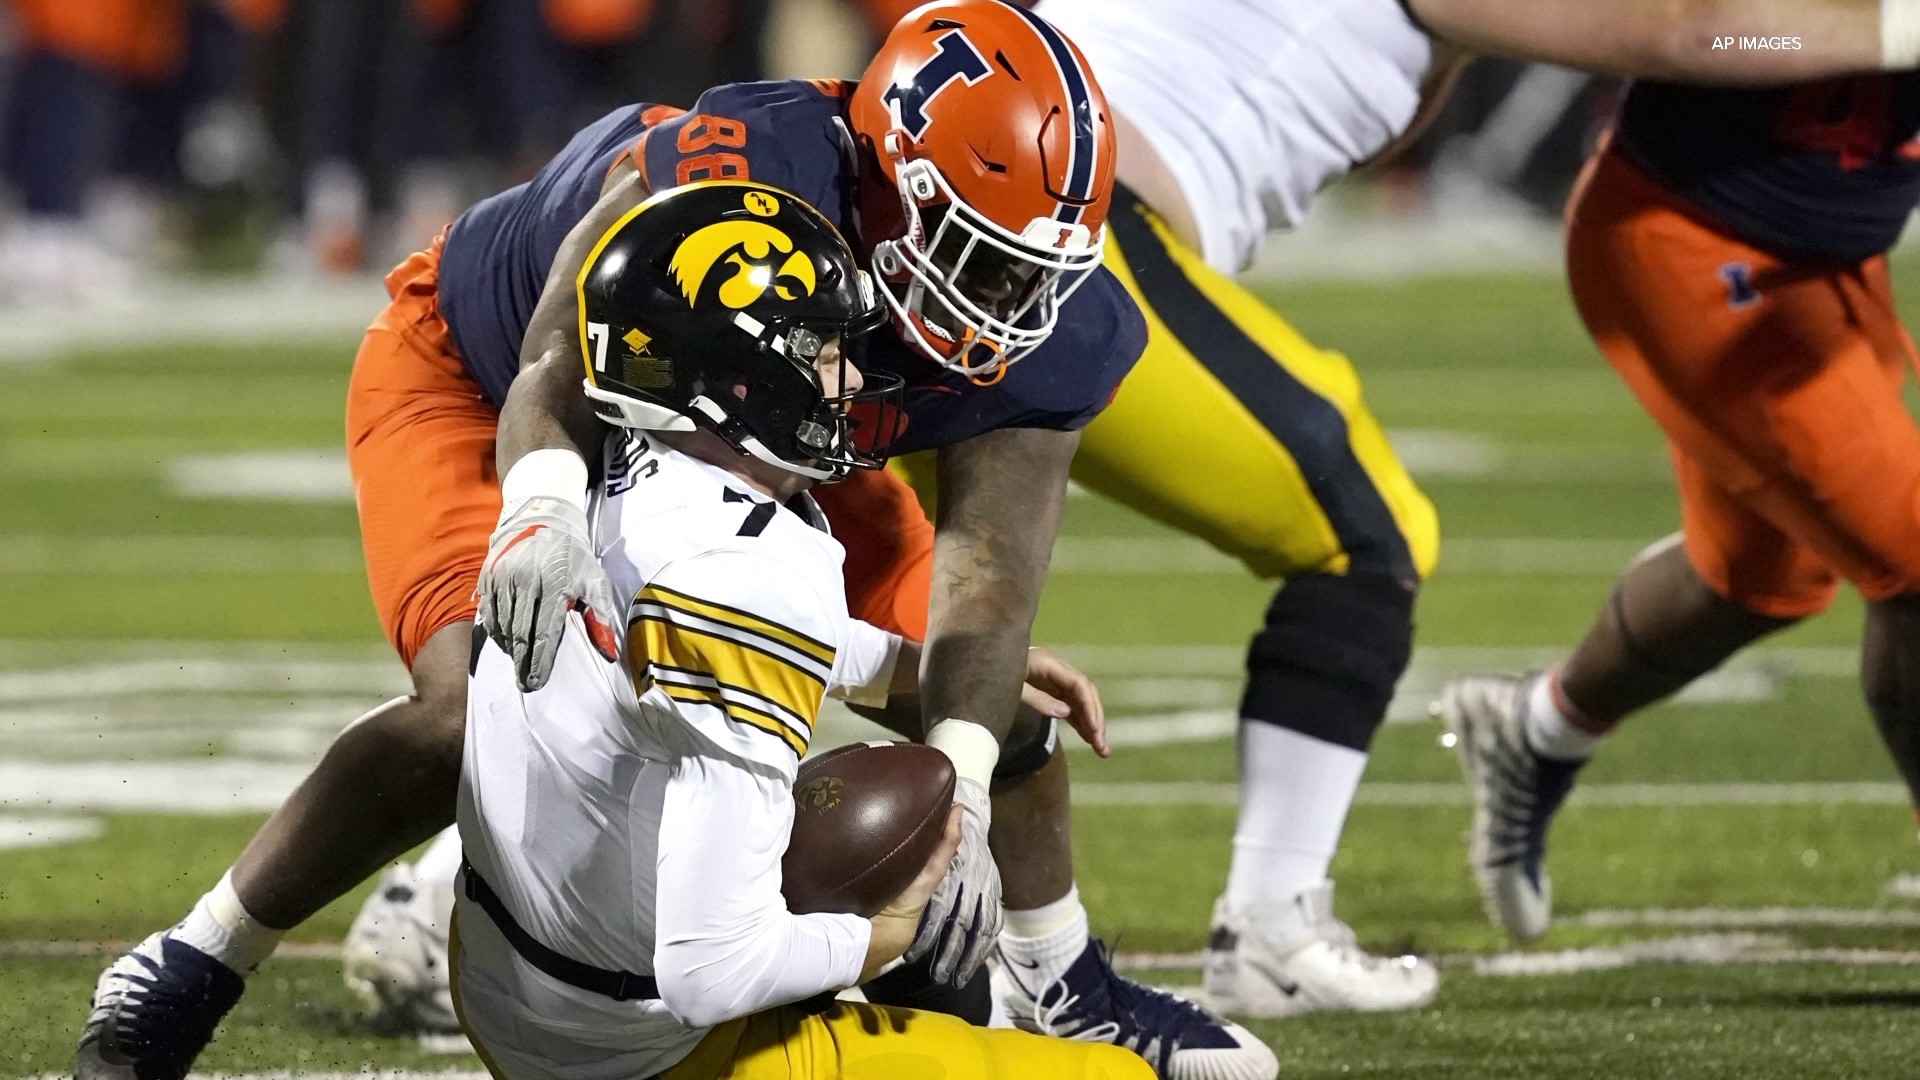 Illinois, ranked #24 in the country, also boasts the nation's top scoring defense.